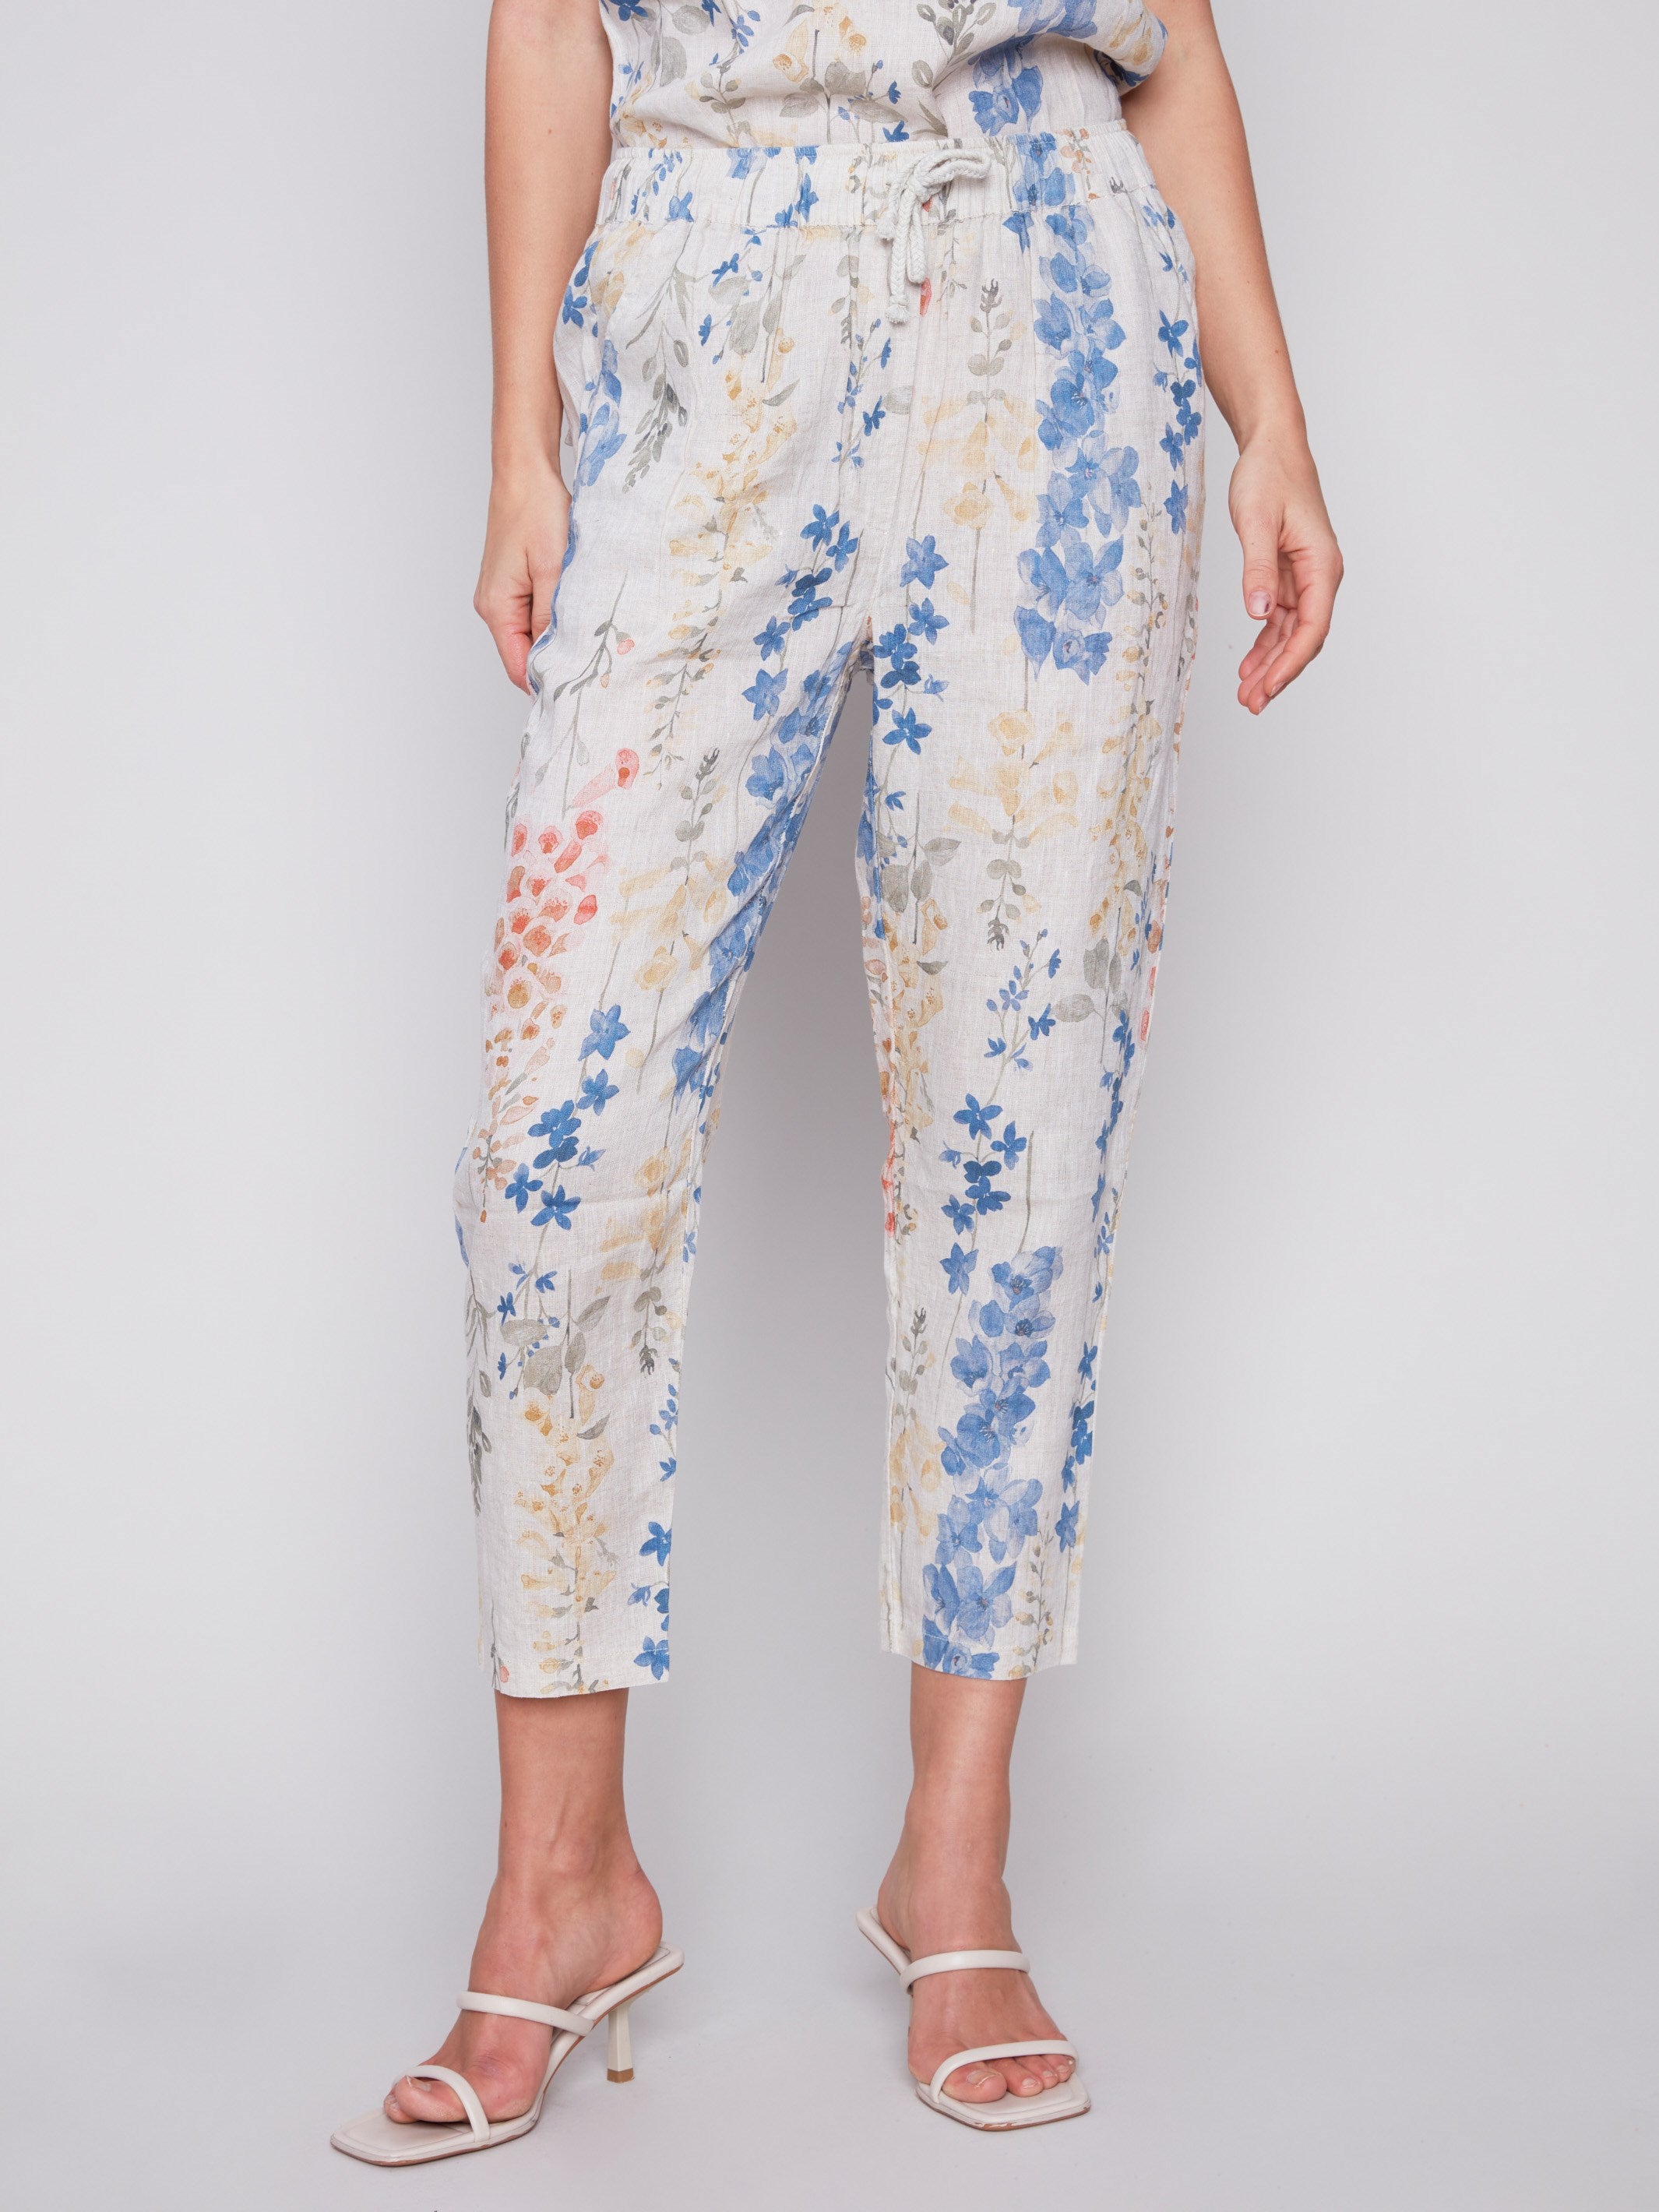 Printed Linen Pull-On Pants - Garden - Charlie B Collection Canada - Image 2